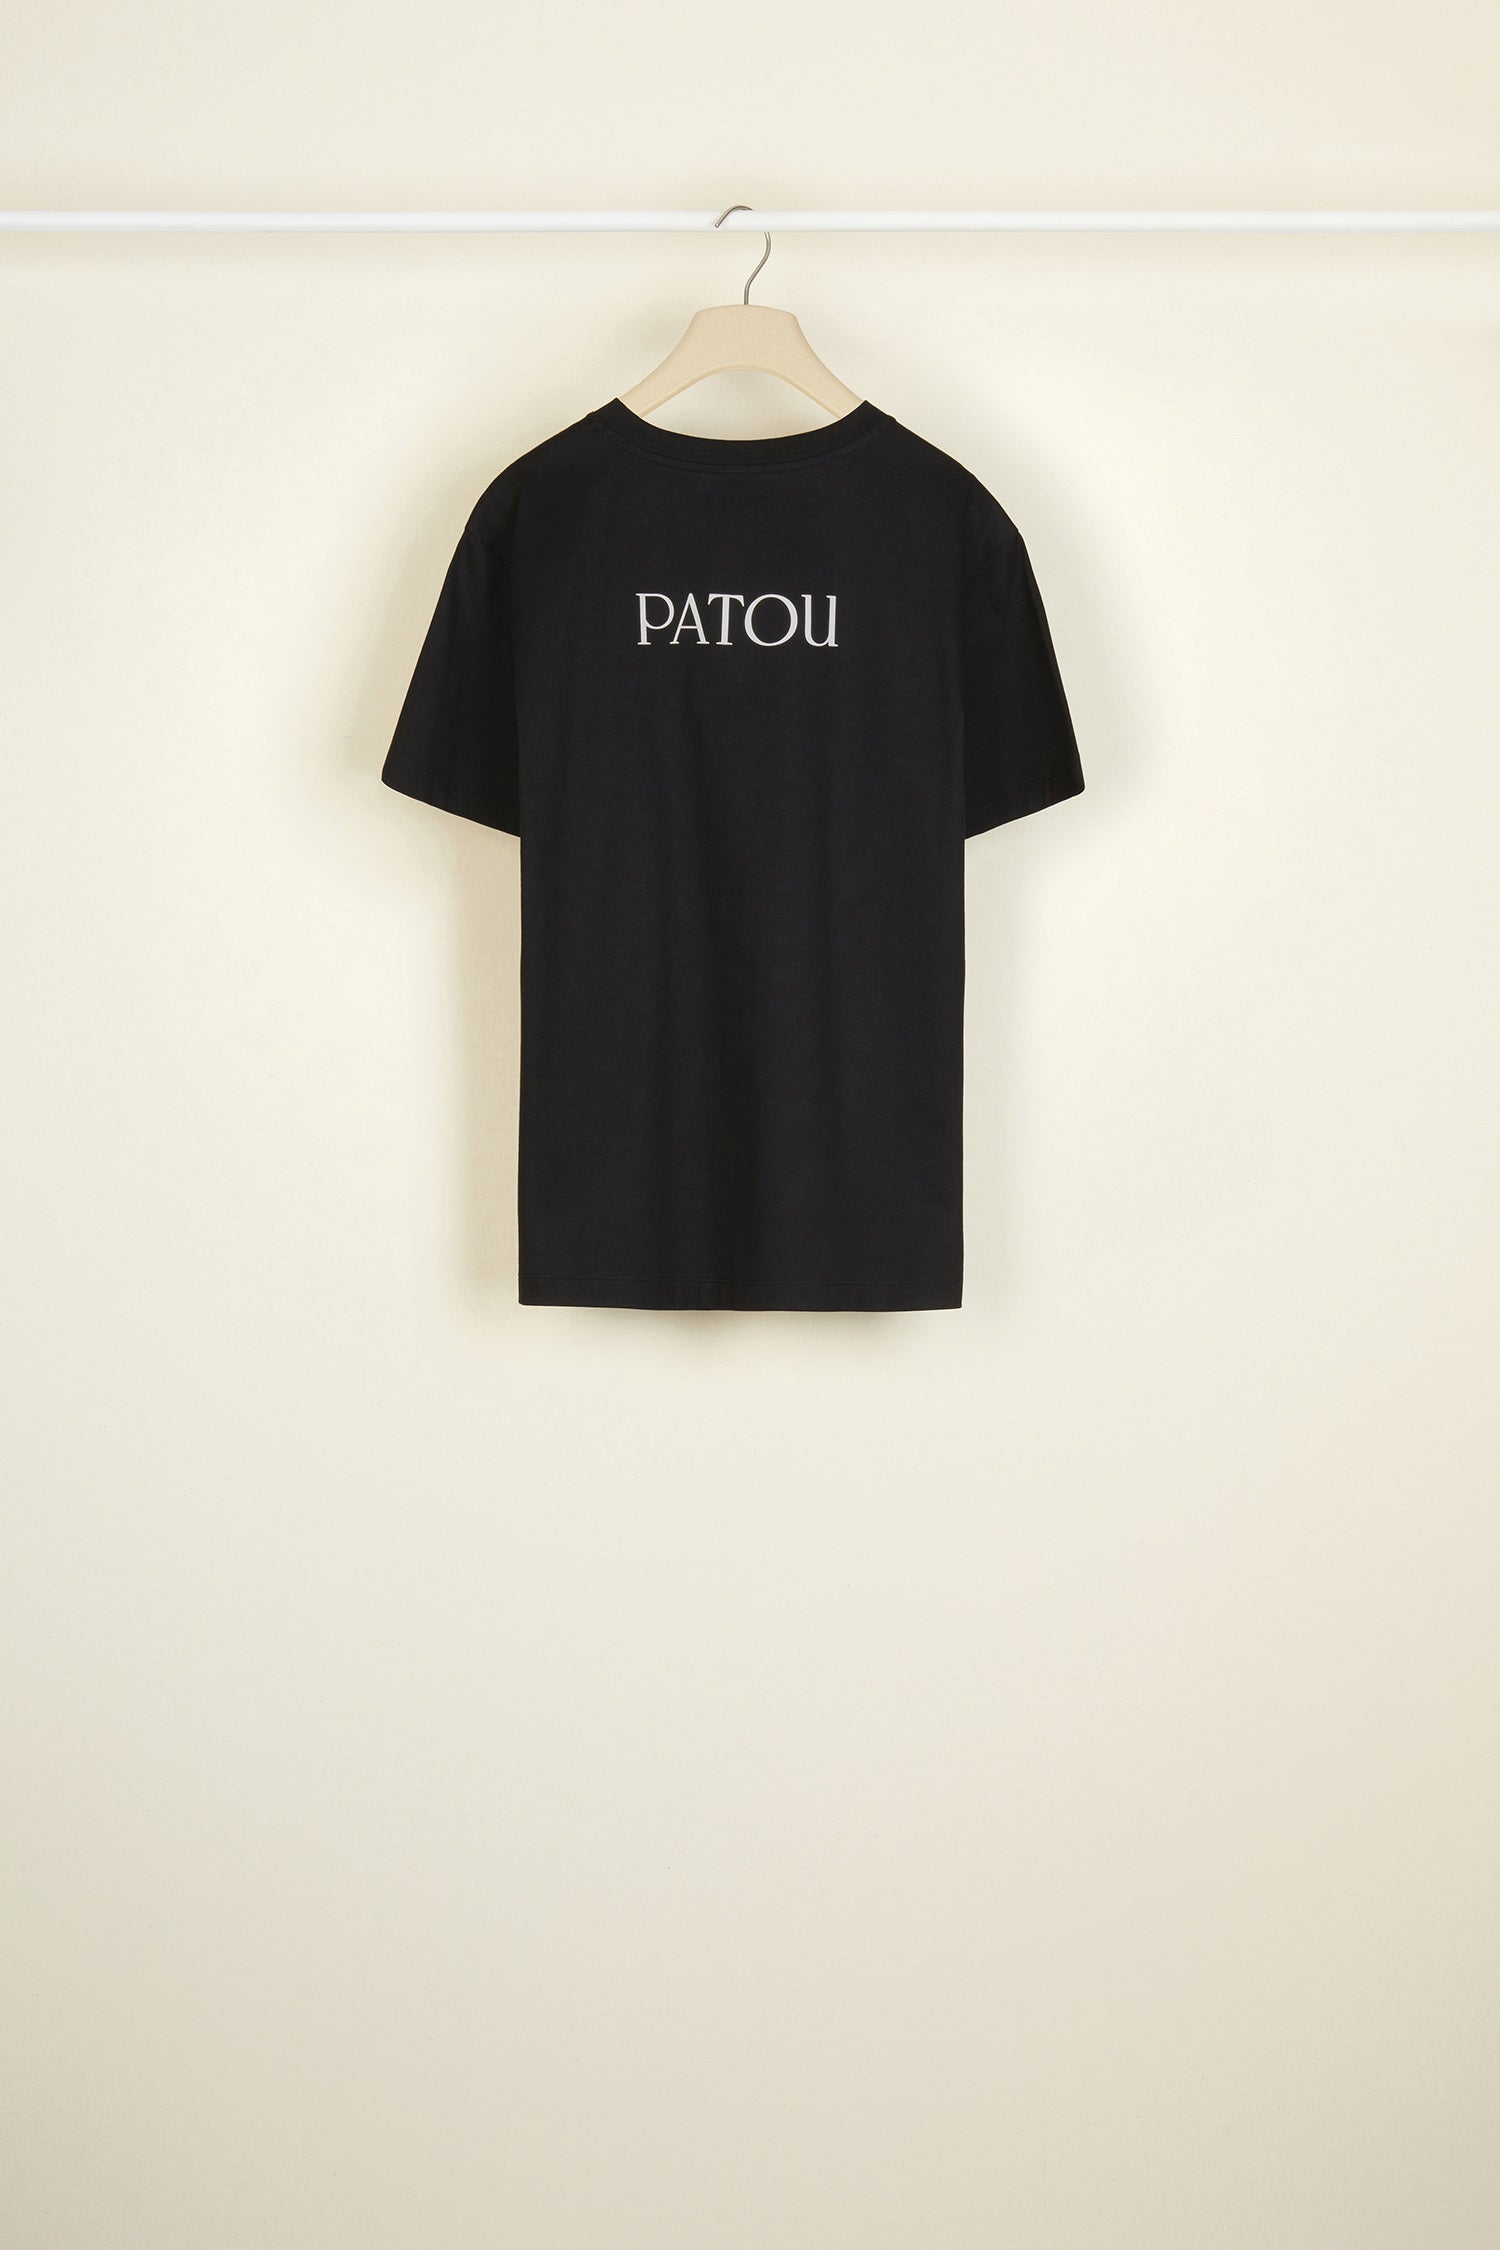 Patou | #PatouGether T-shirt | 100% of the proceeds donated to WHO